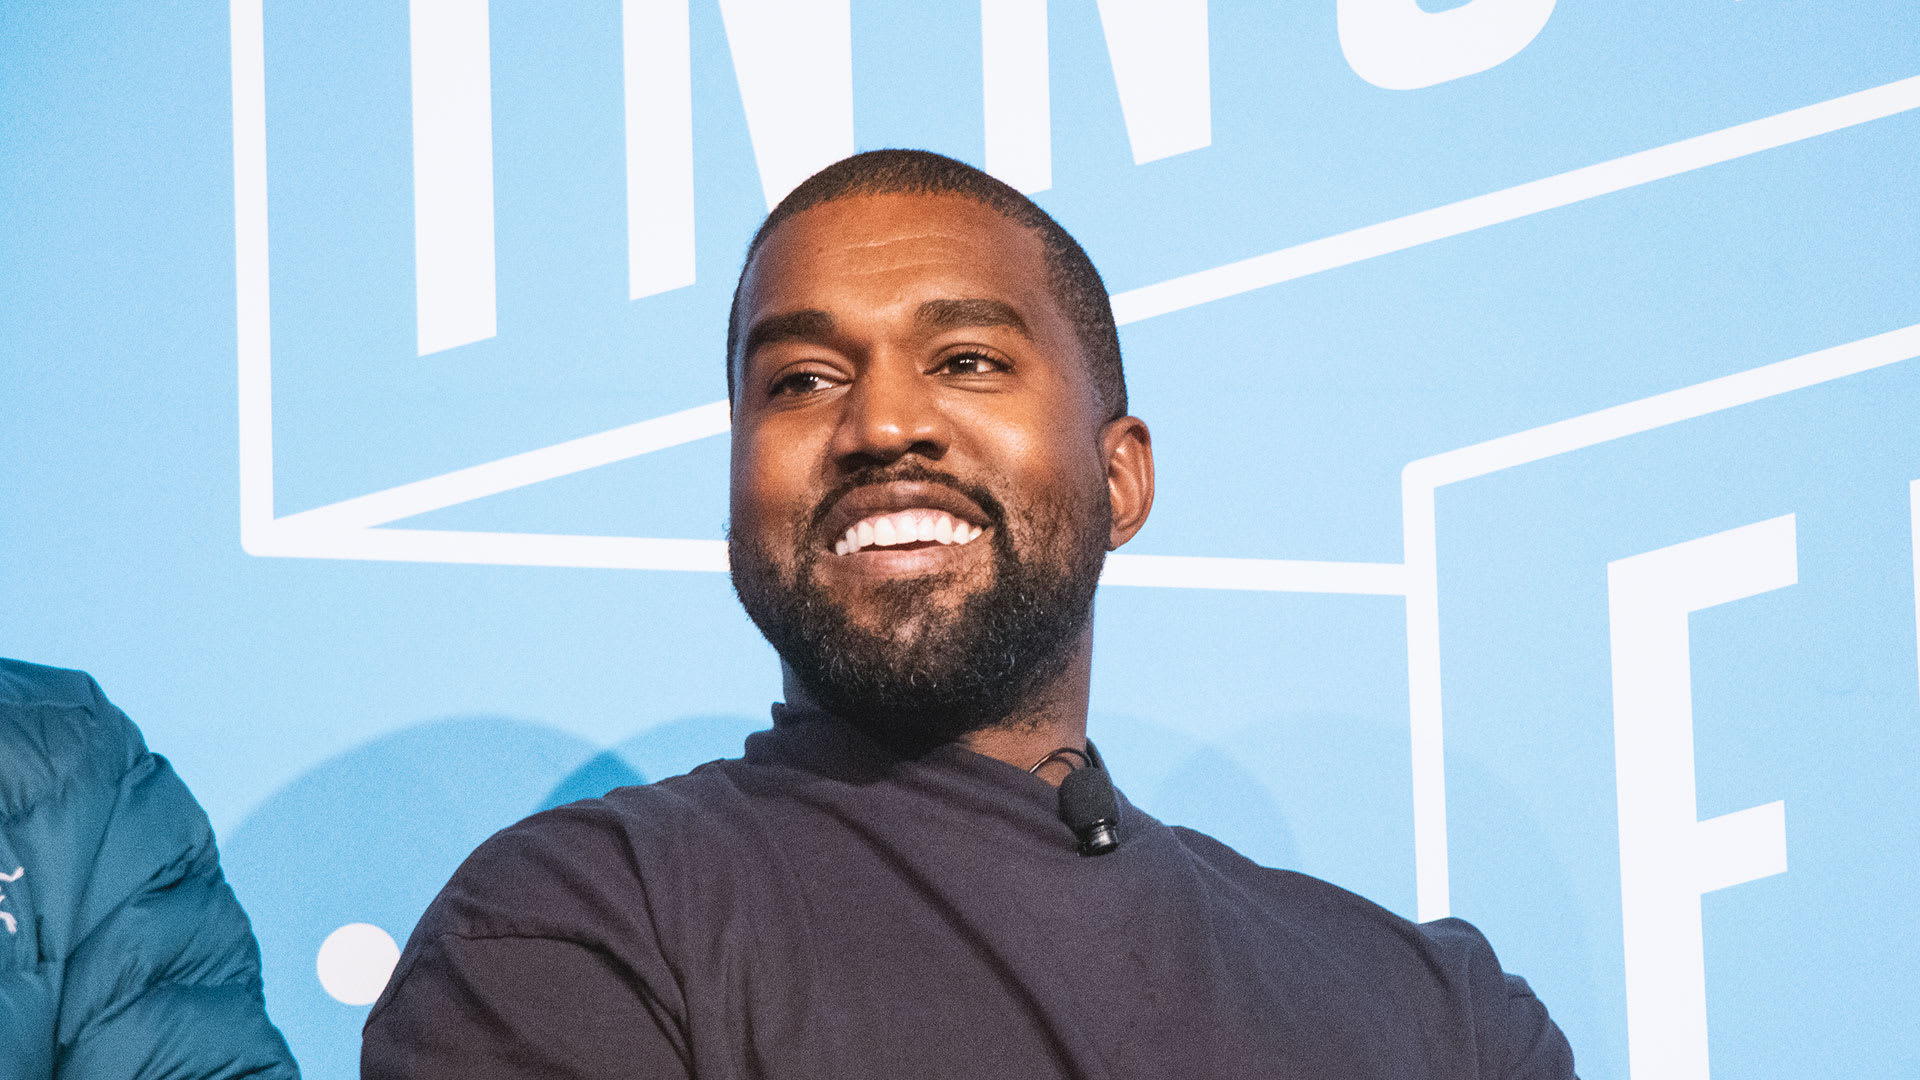 Kanye West on his design process, sustainability, and the future of Yeezy